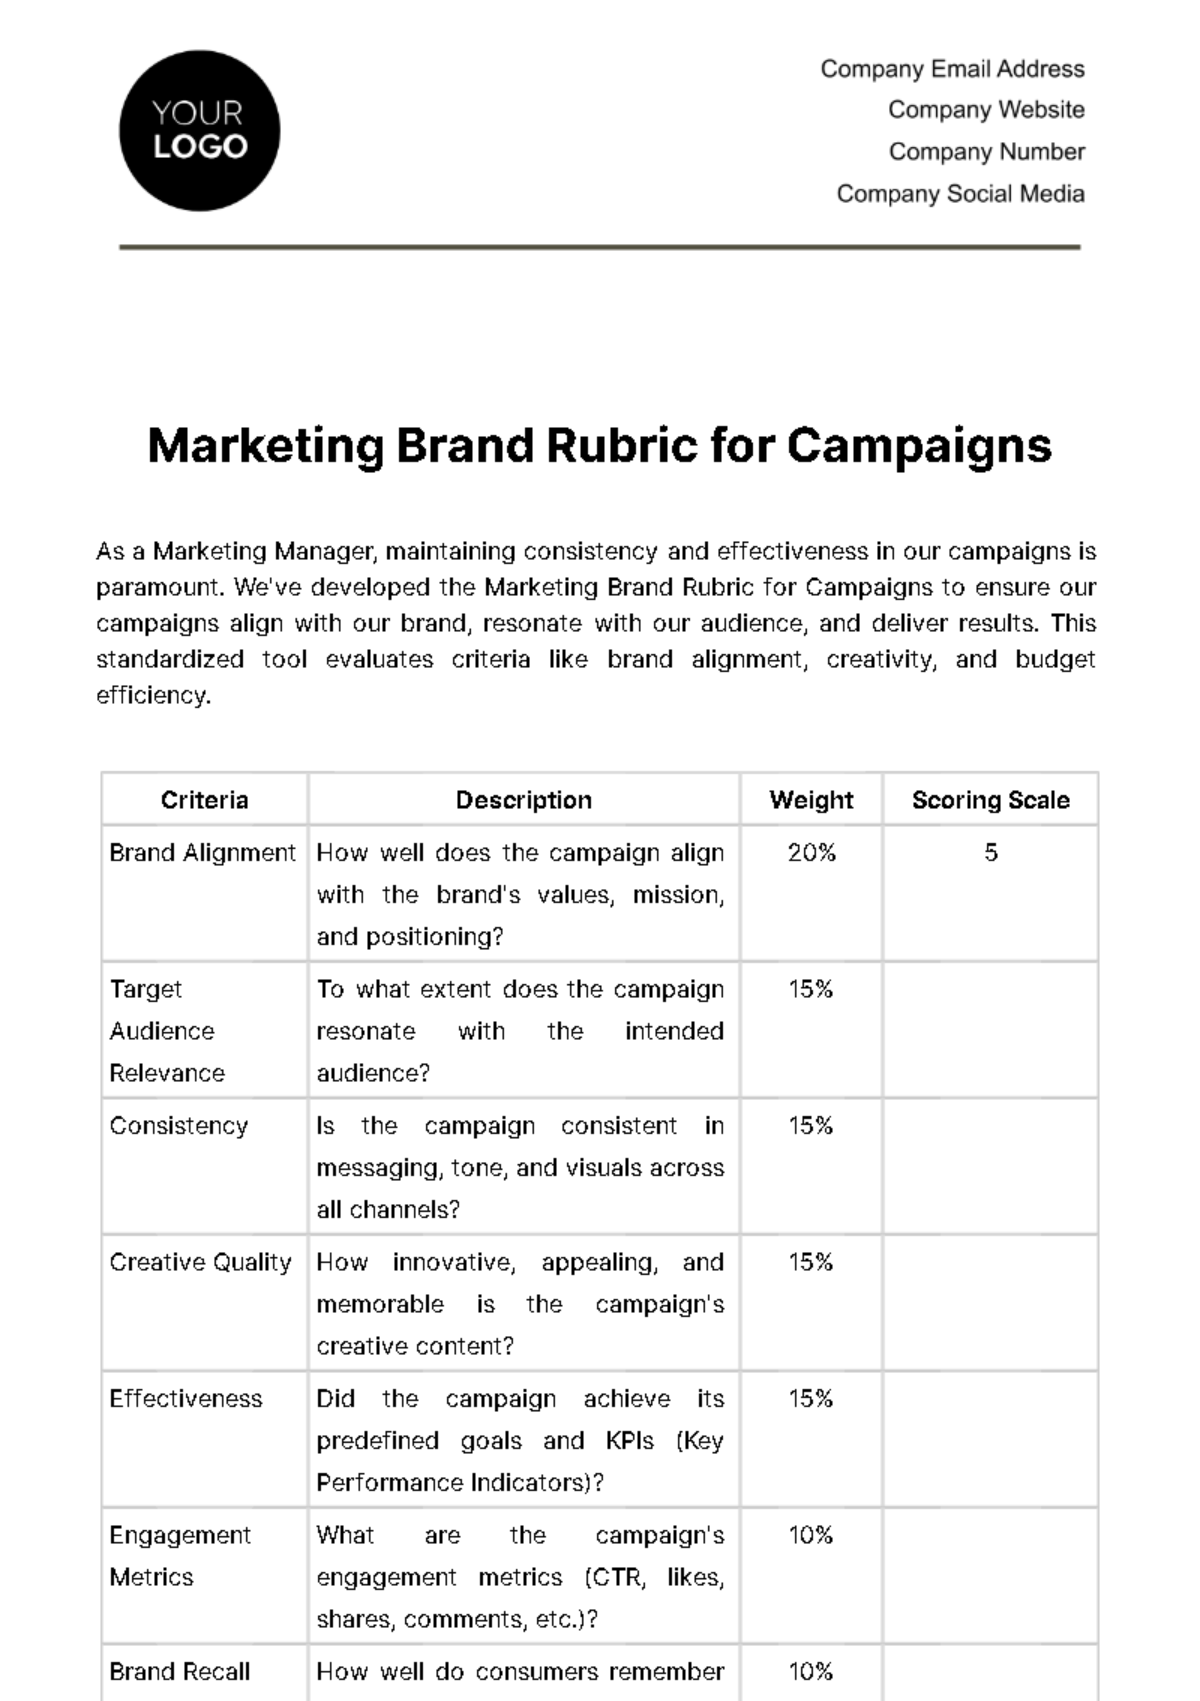 Free Marketing Brand Rubric for Campaigns Template